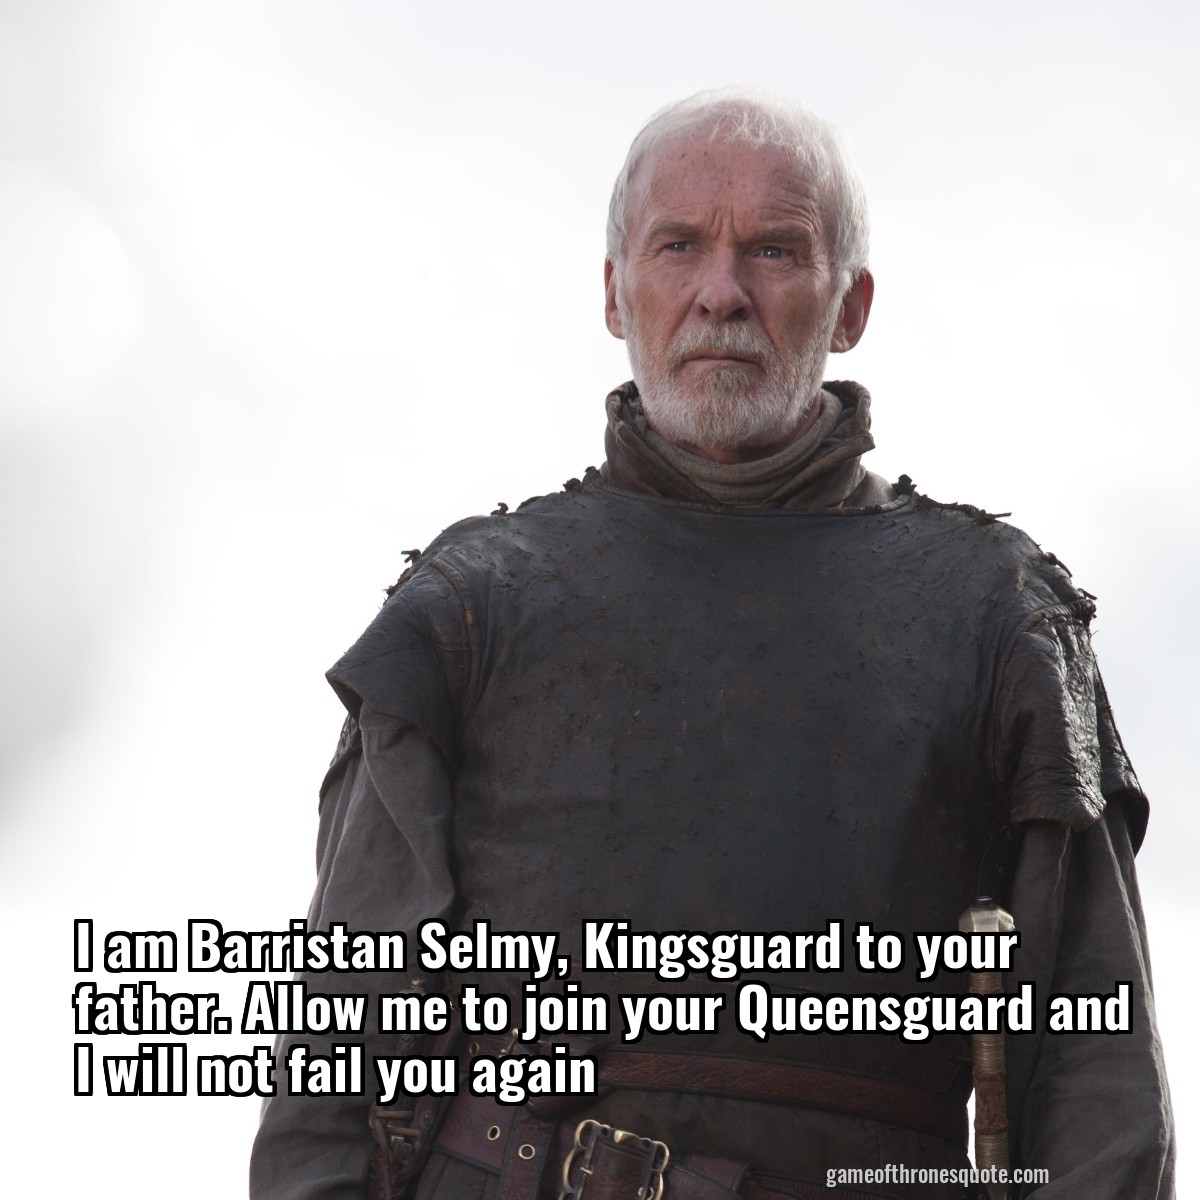 I am Barristan Selmy, Kingsguard to your father. Allow me to join your Queensguard and I will not fail you again
